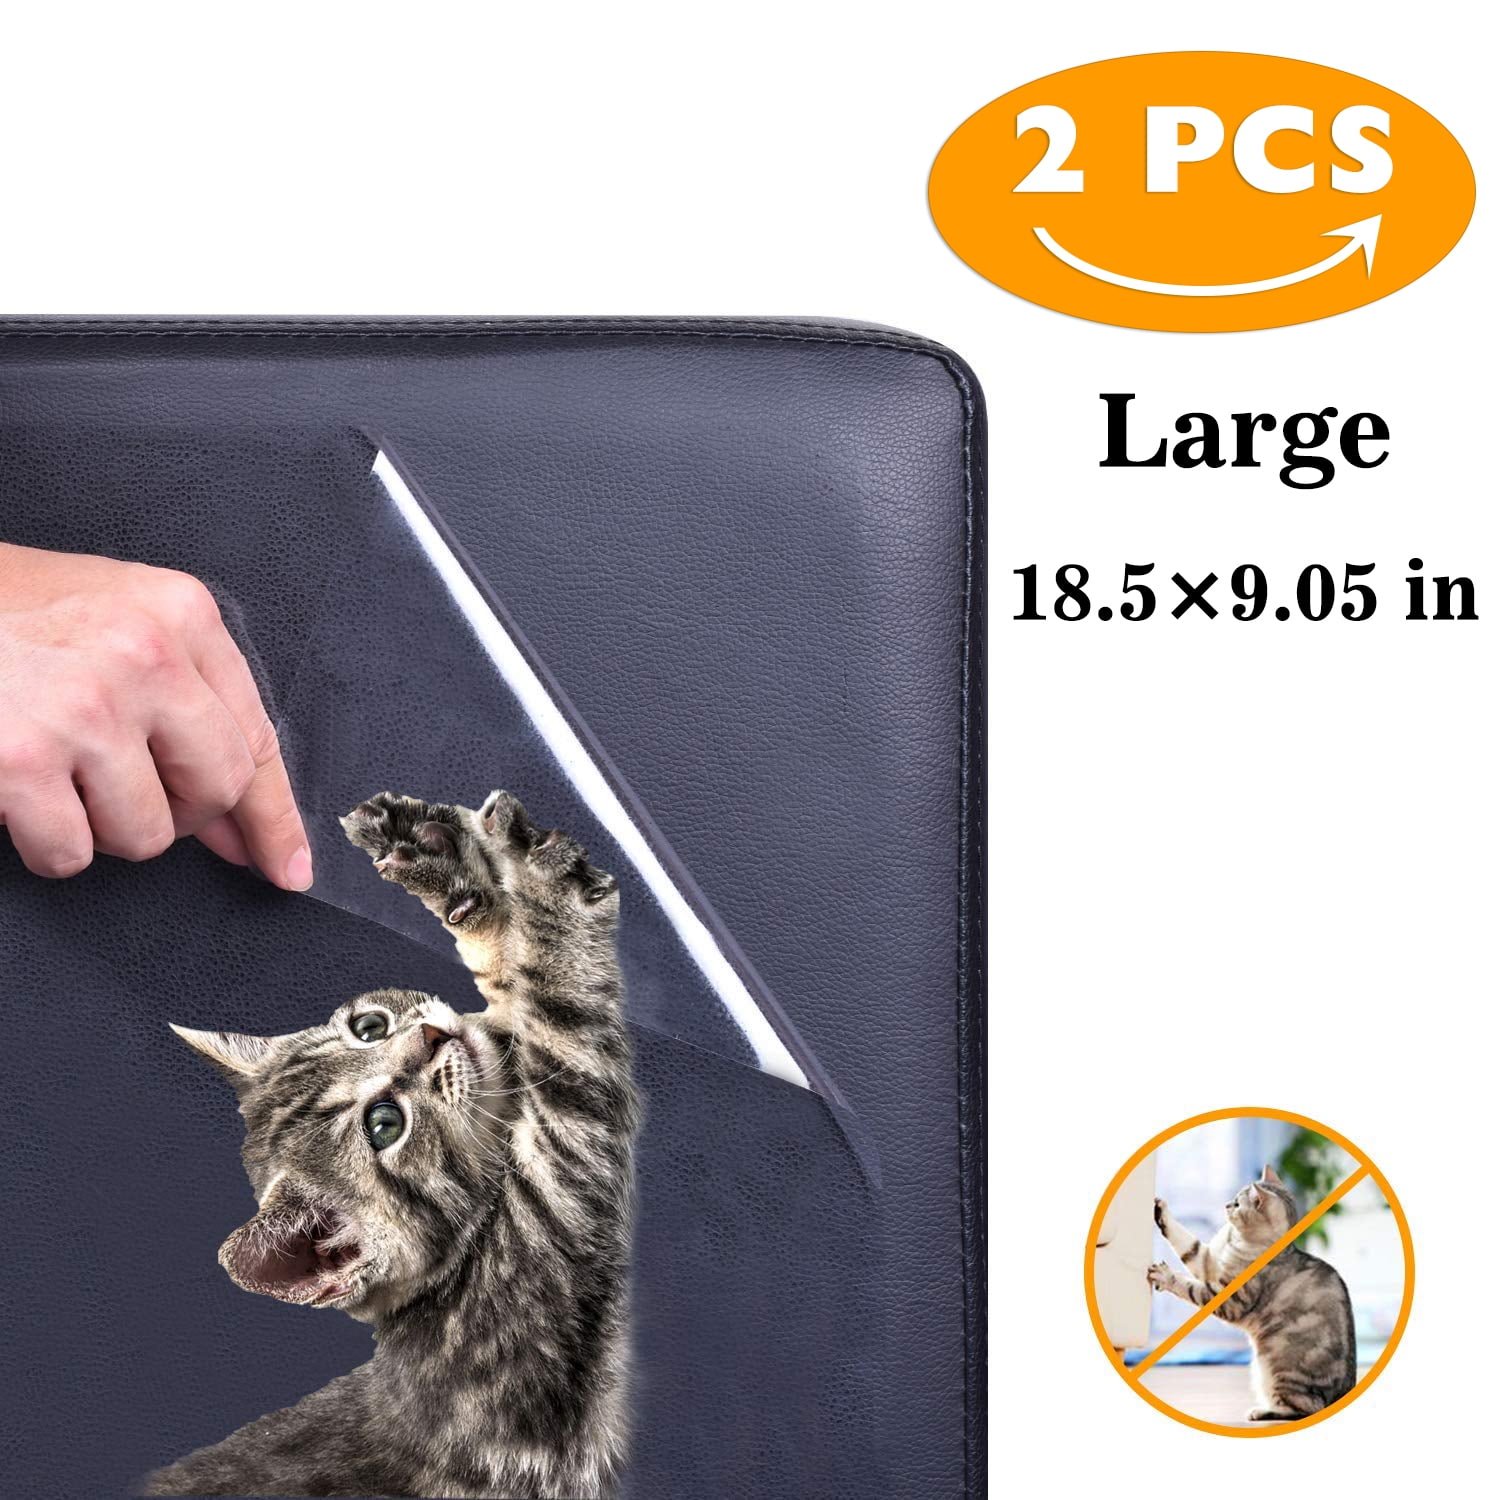 Small COCOPLAZA 2 Pcs Cat Anti-Scratch Sticker Pet Furniture Protector Cats Scratching Guard Kitten Couch Tape Deterrent Clear Double Sided Protecti